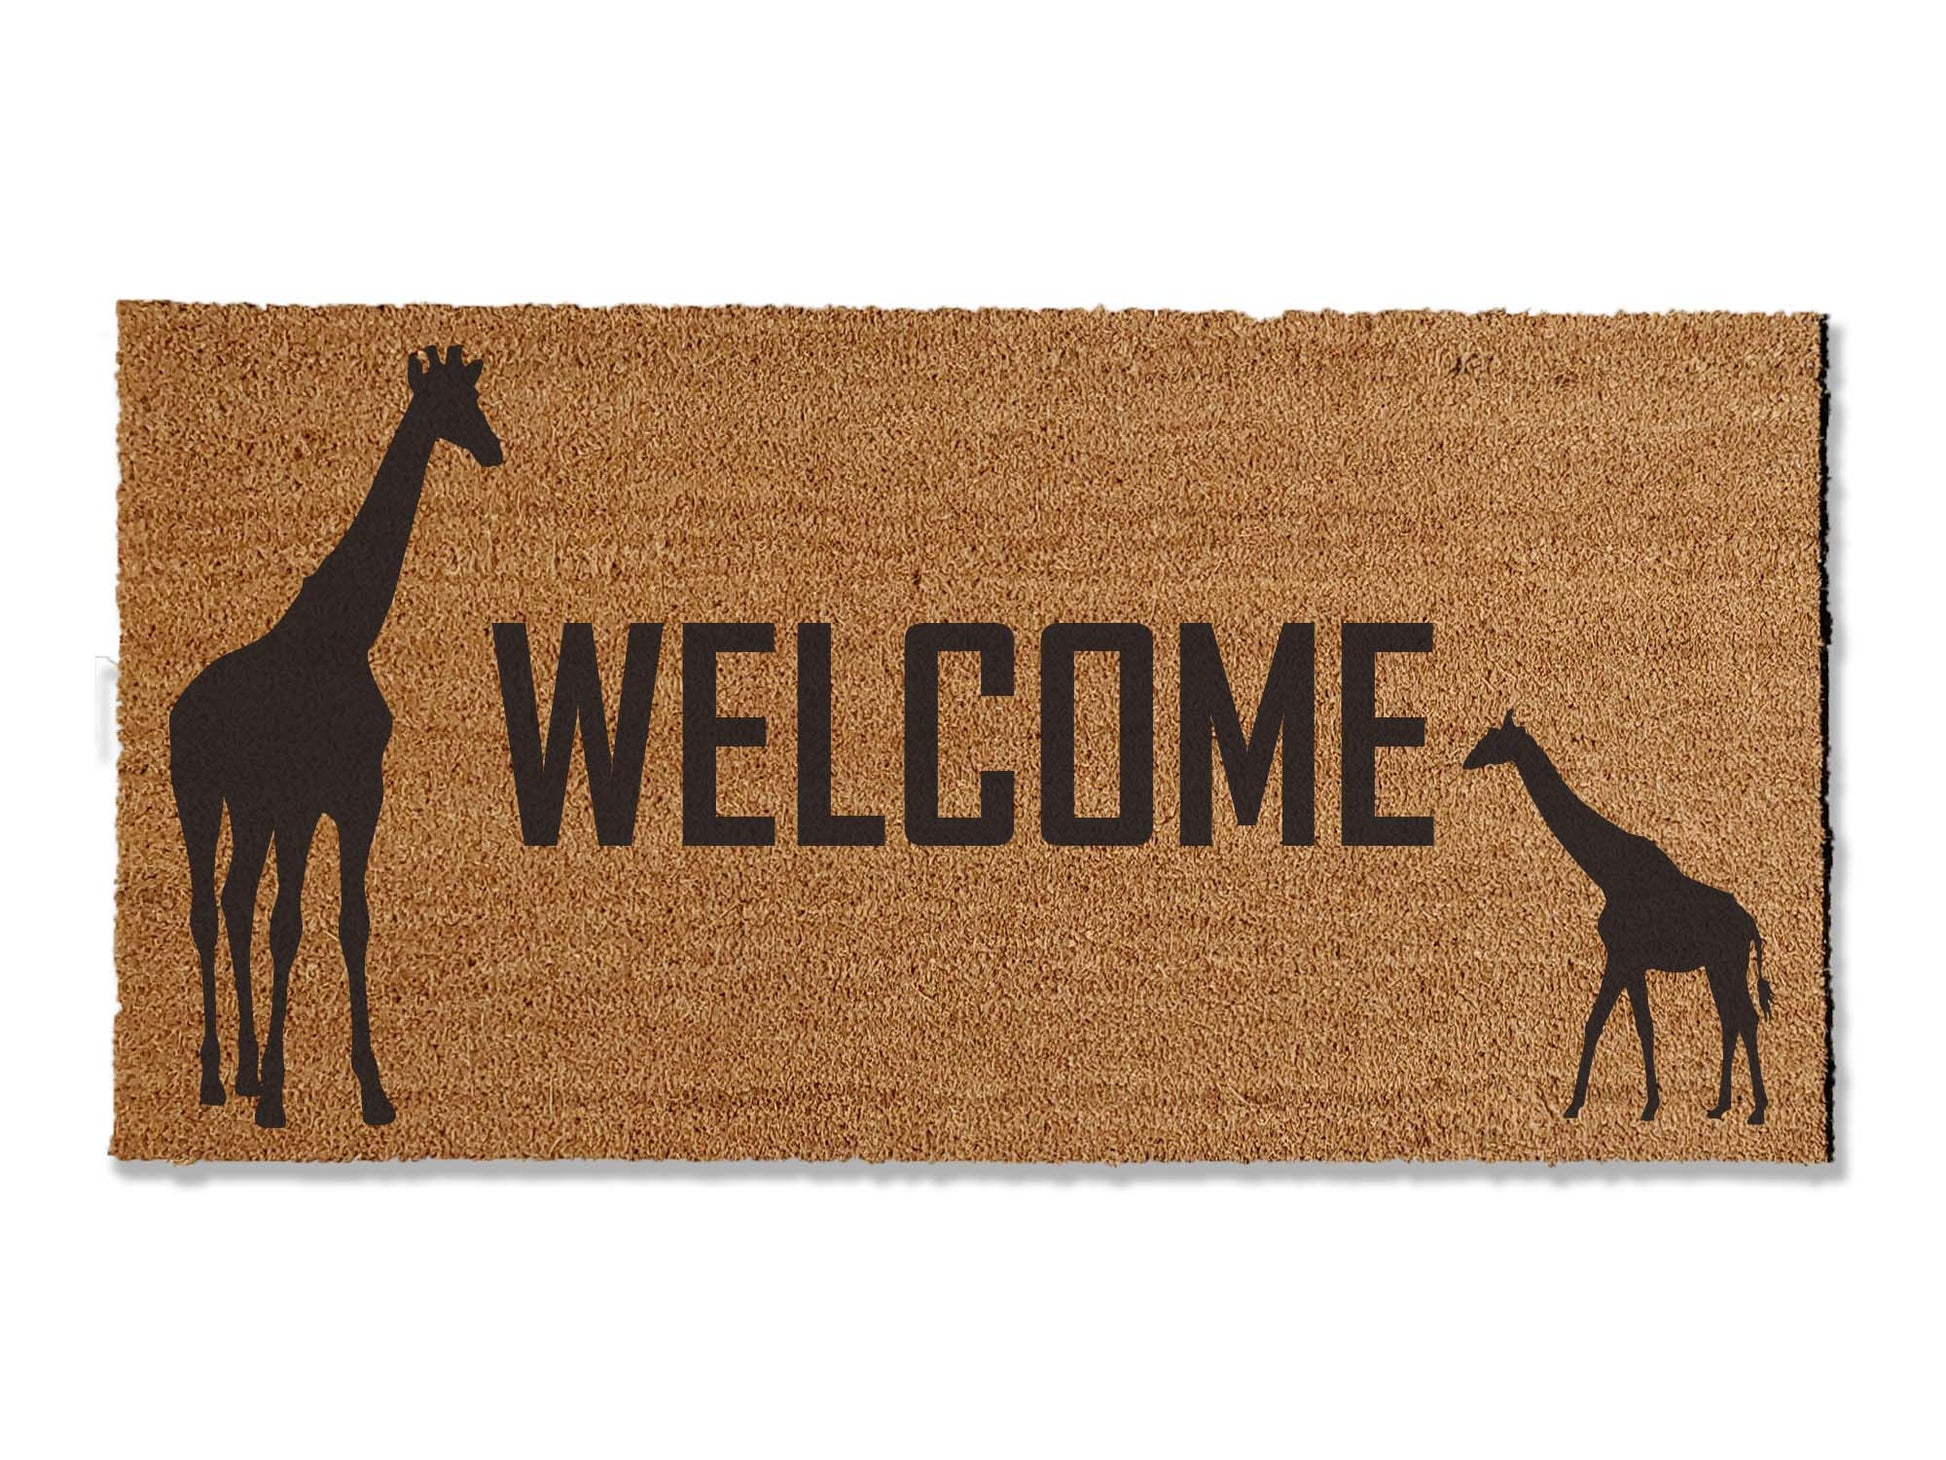 Introducing our giraffe-themed coir doormat, available in multiple sizes. Elevate your entryway with this charming design, offering both durability and style. Welcome guests with the perfect touch by incorporating this unique giraffe doormat into your home's decor.